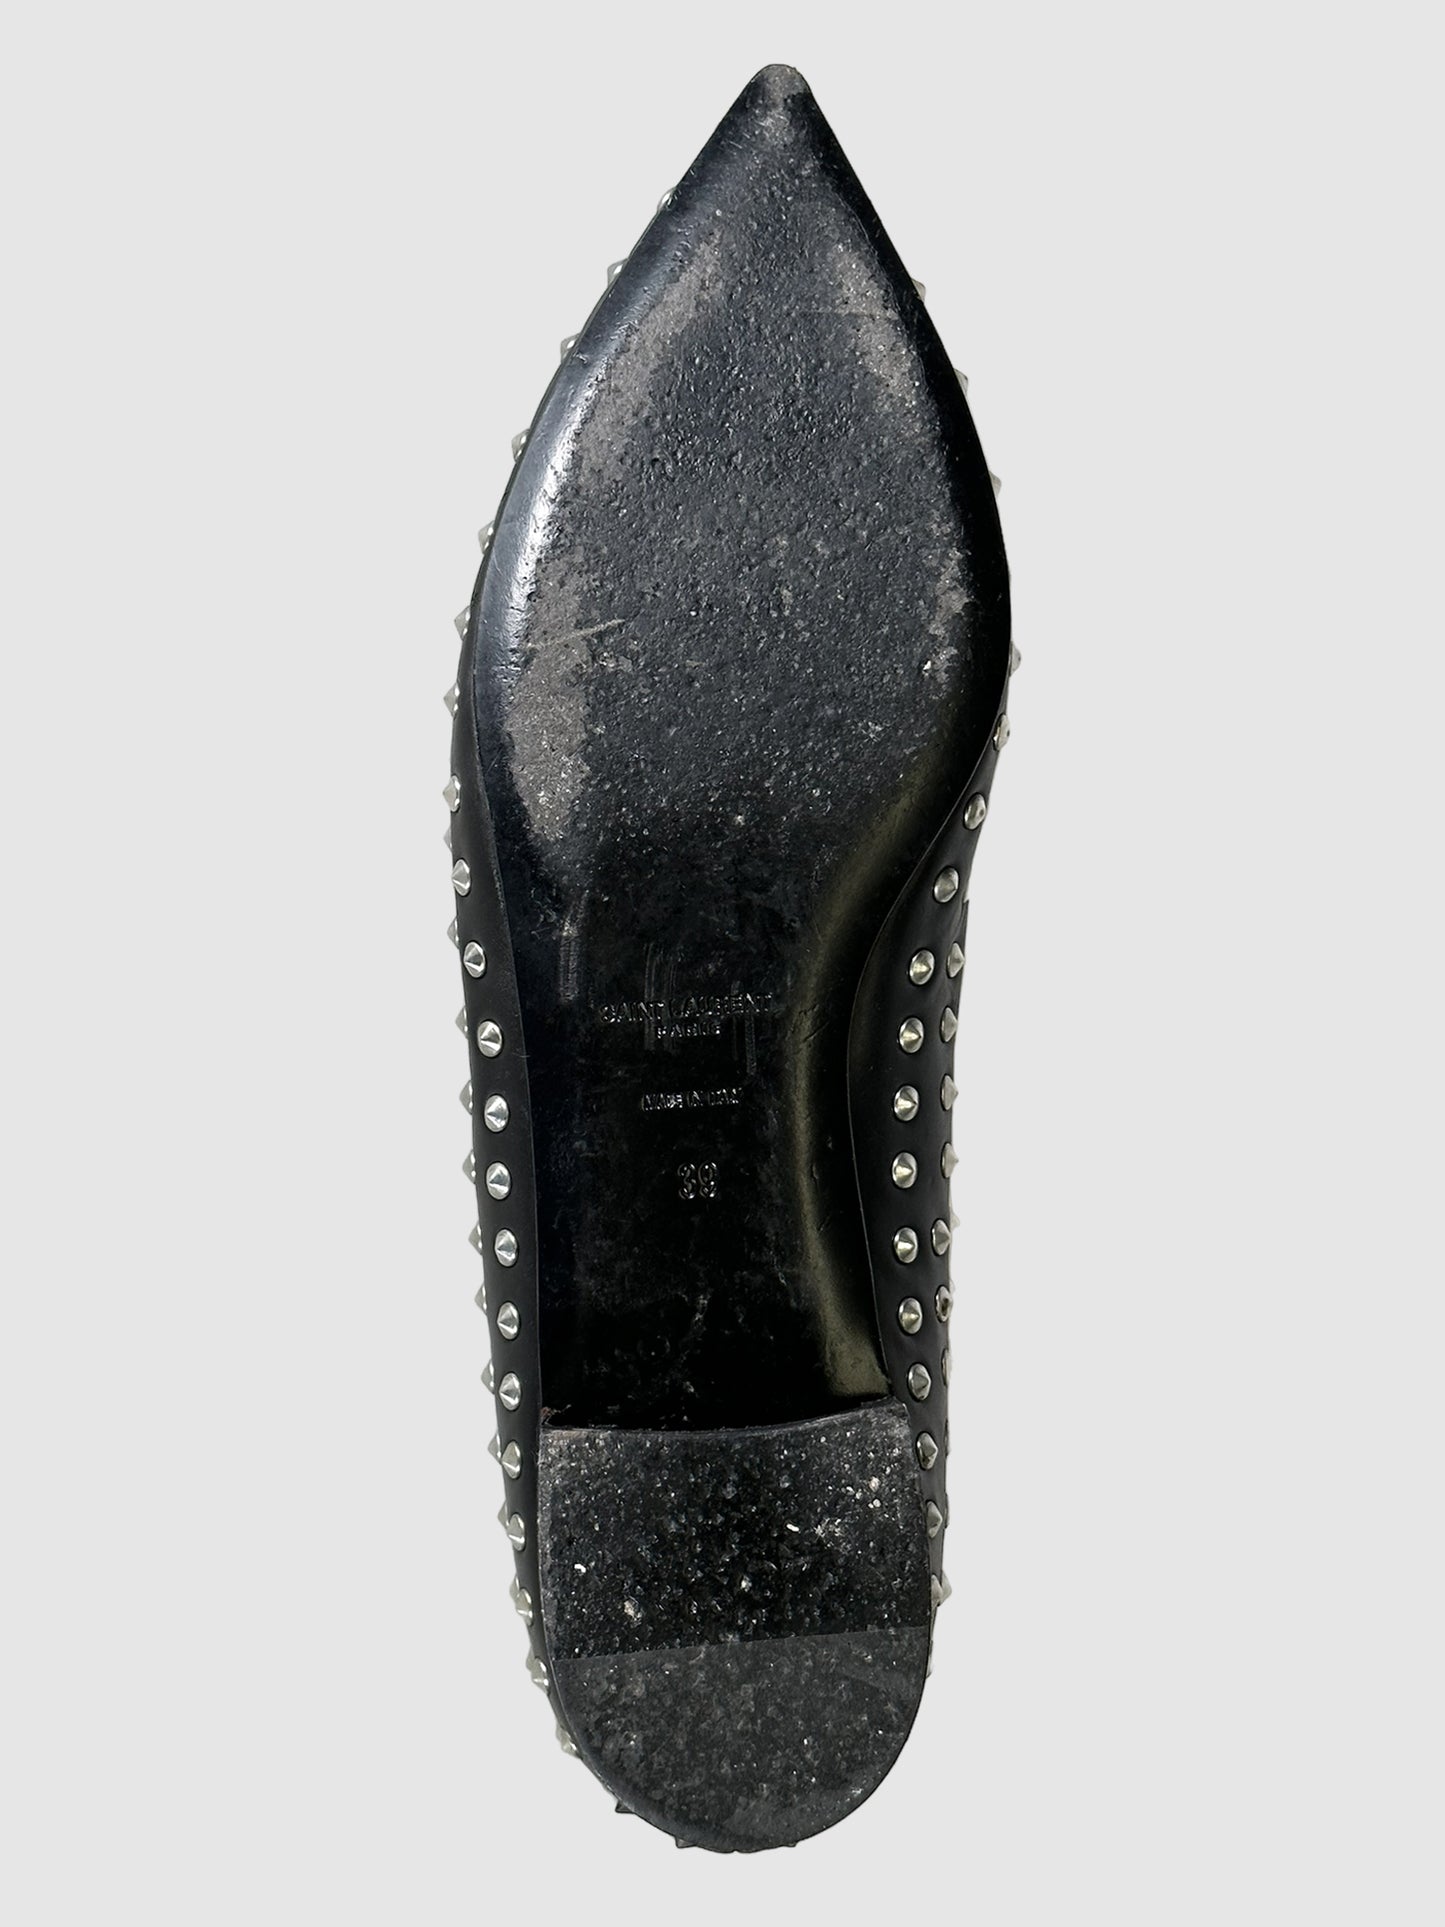 Saint Laurent Studded Pointed Toe Flats - Size 39